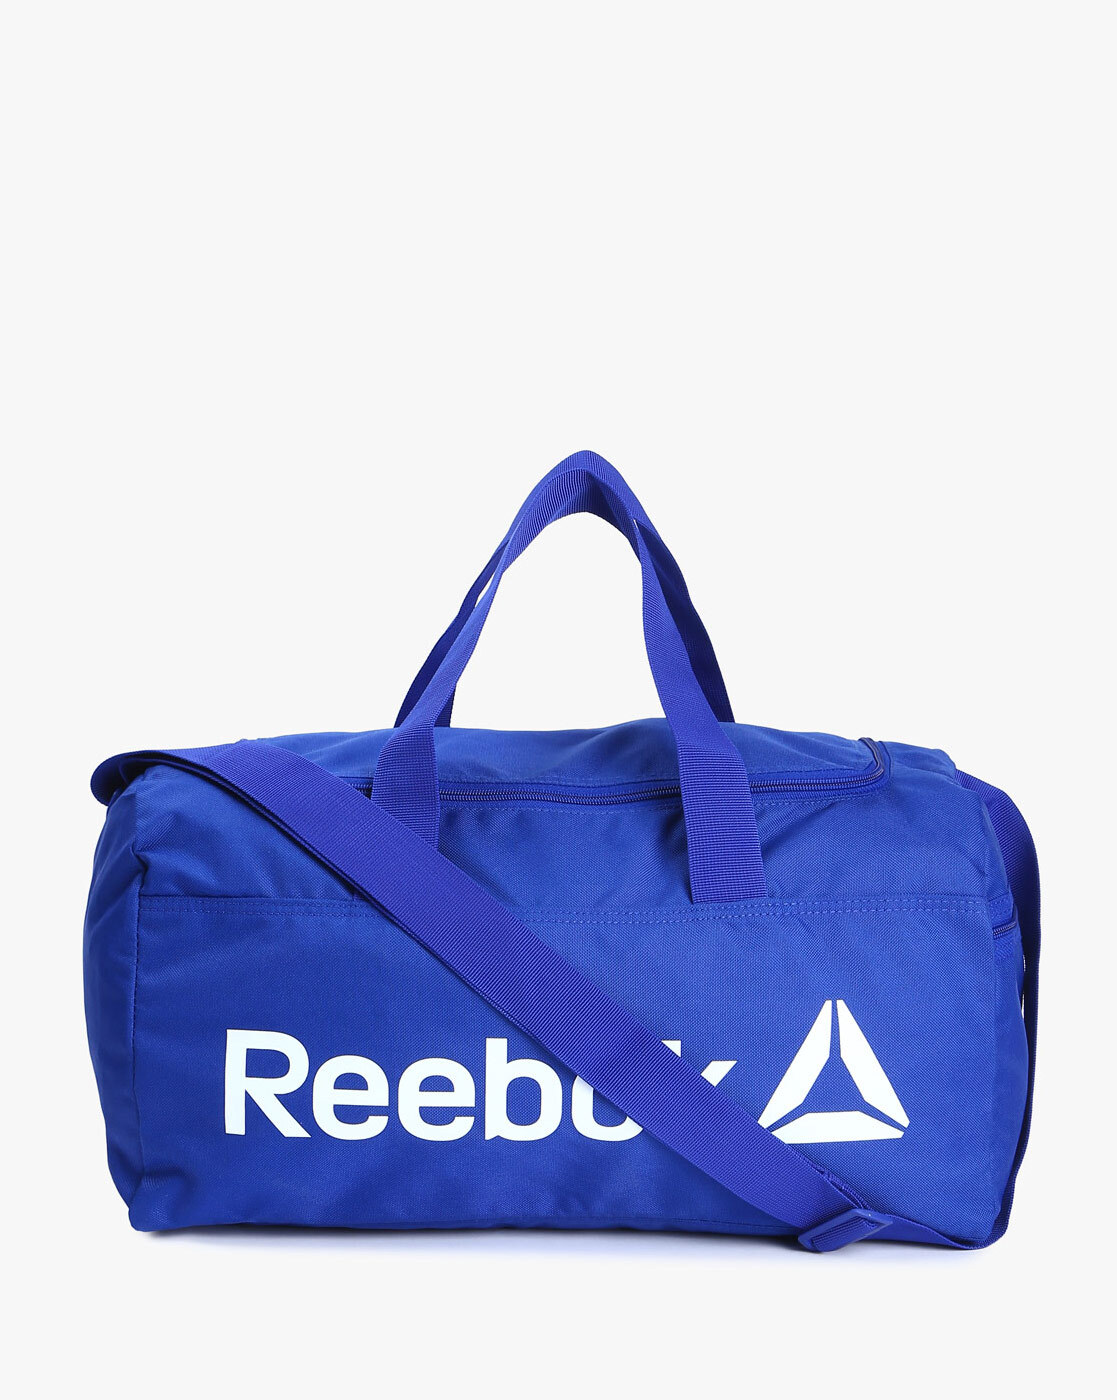 Reebok Duffel Bag - Aleph Sports Gym Bag - Lightweight Carry On Weekend  Overnight Luggage for Travel, Beach, Yoga, Black : Buy Online at Best Price  in KSA - Souq is now Amazon.sa: Fashion